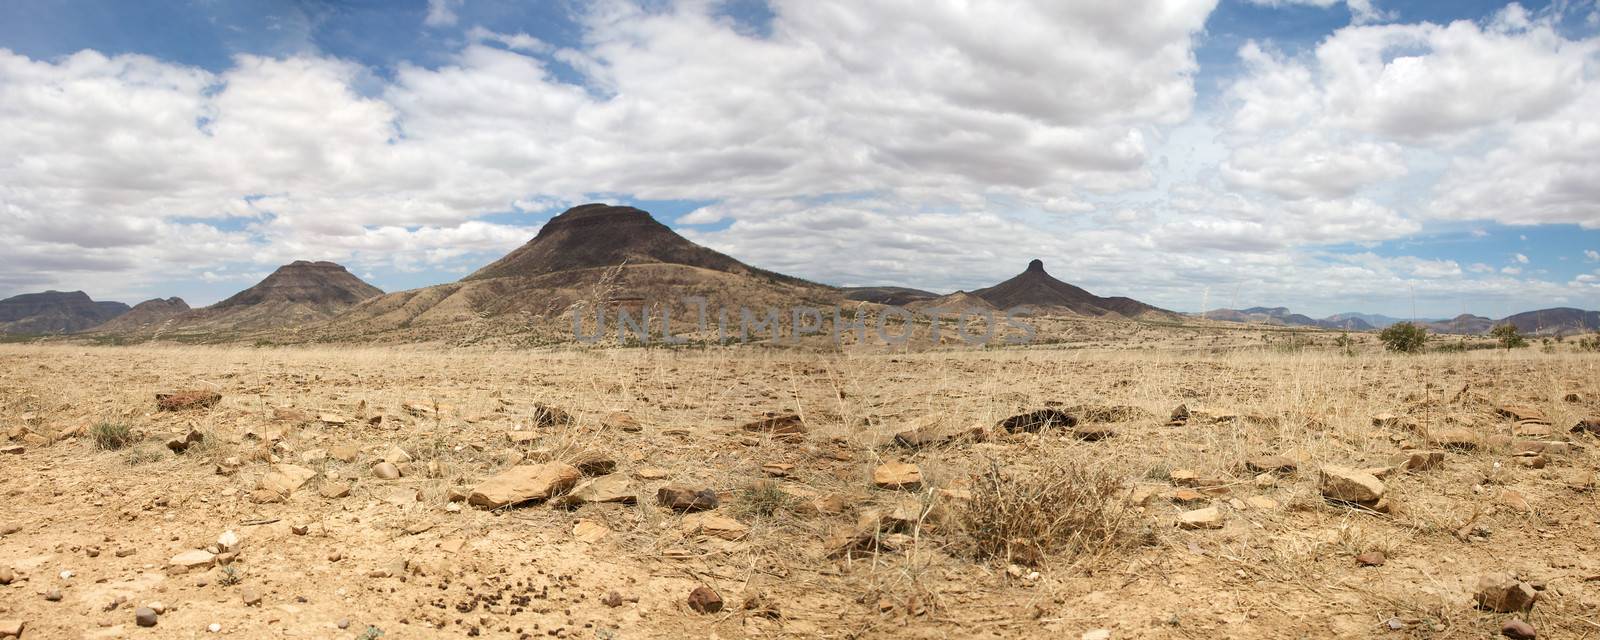 Kaokoland game reserve in Namibia, sand track going toward the Skeleton Coast Desert with a blue sky